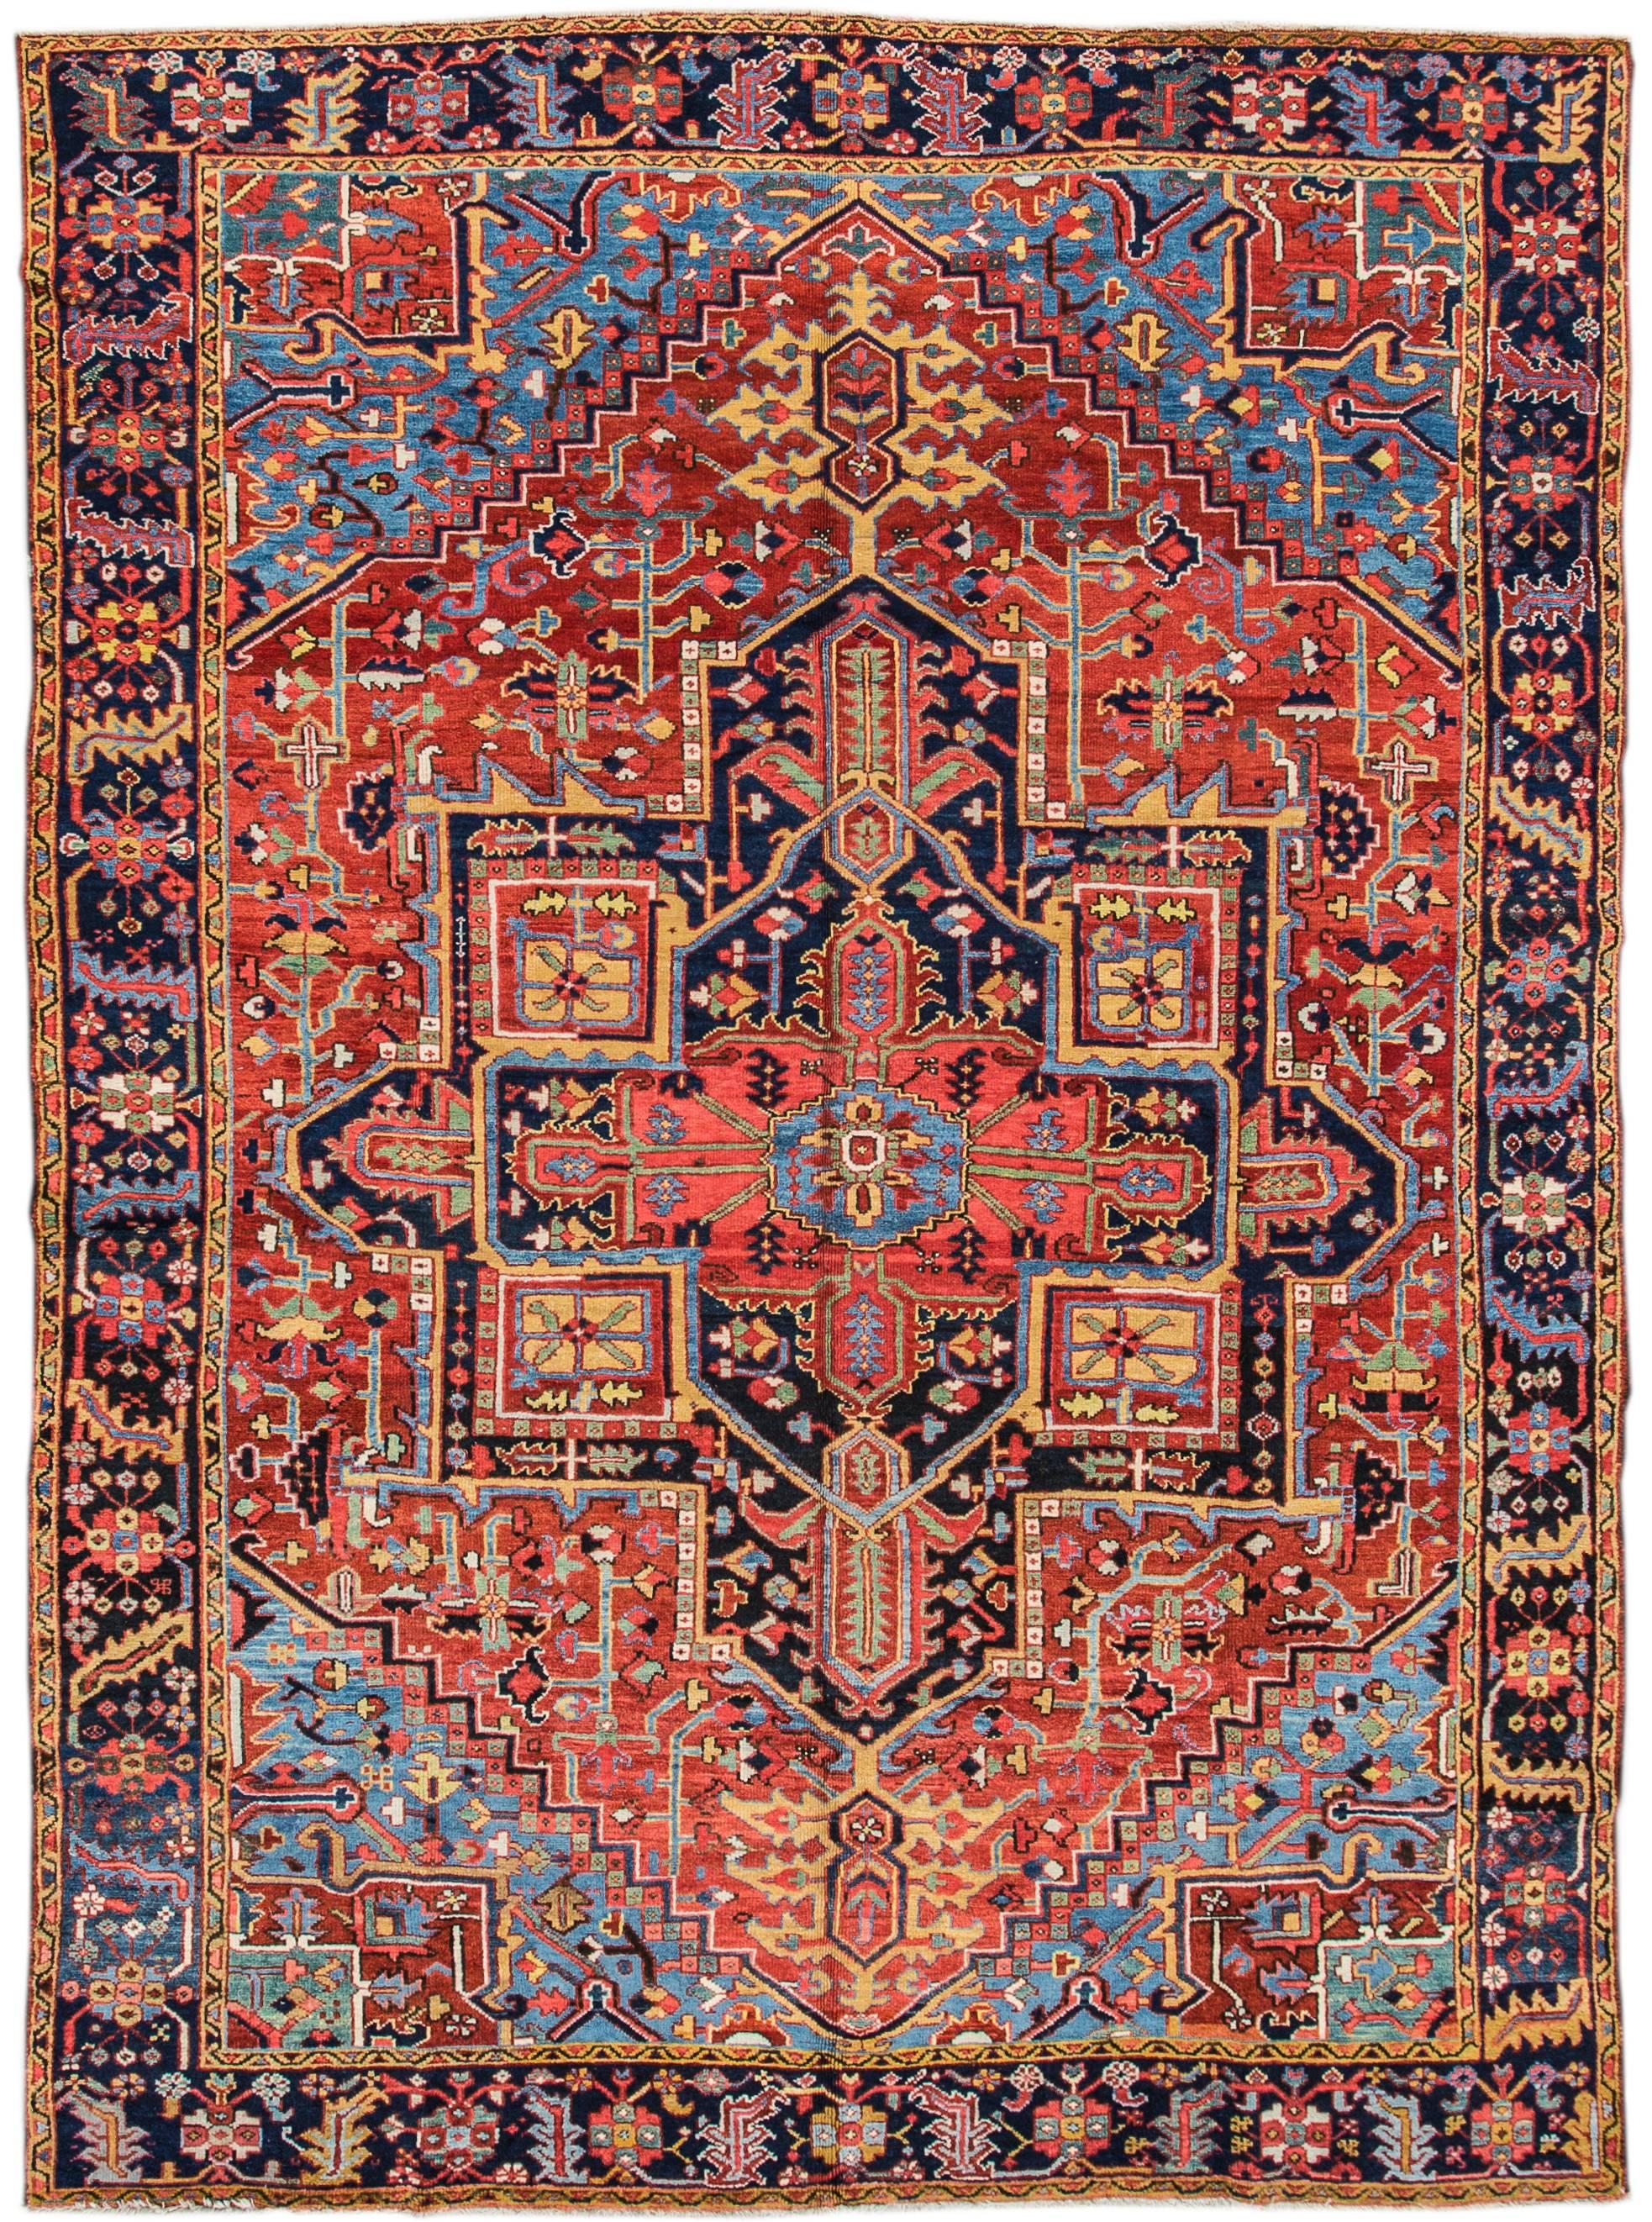 Early 20th century (1920s) Persian Heriz rug with a rust field and traditional medallion design in blue and cream. Measures 8.04x11.